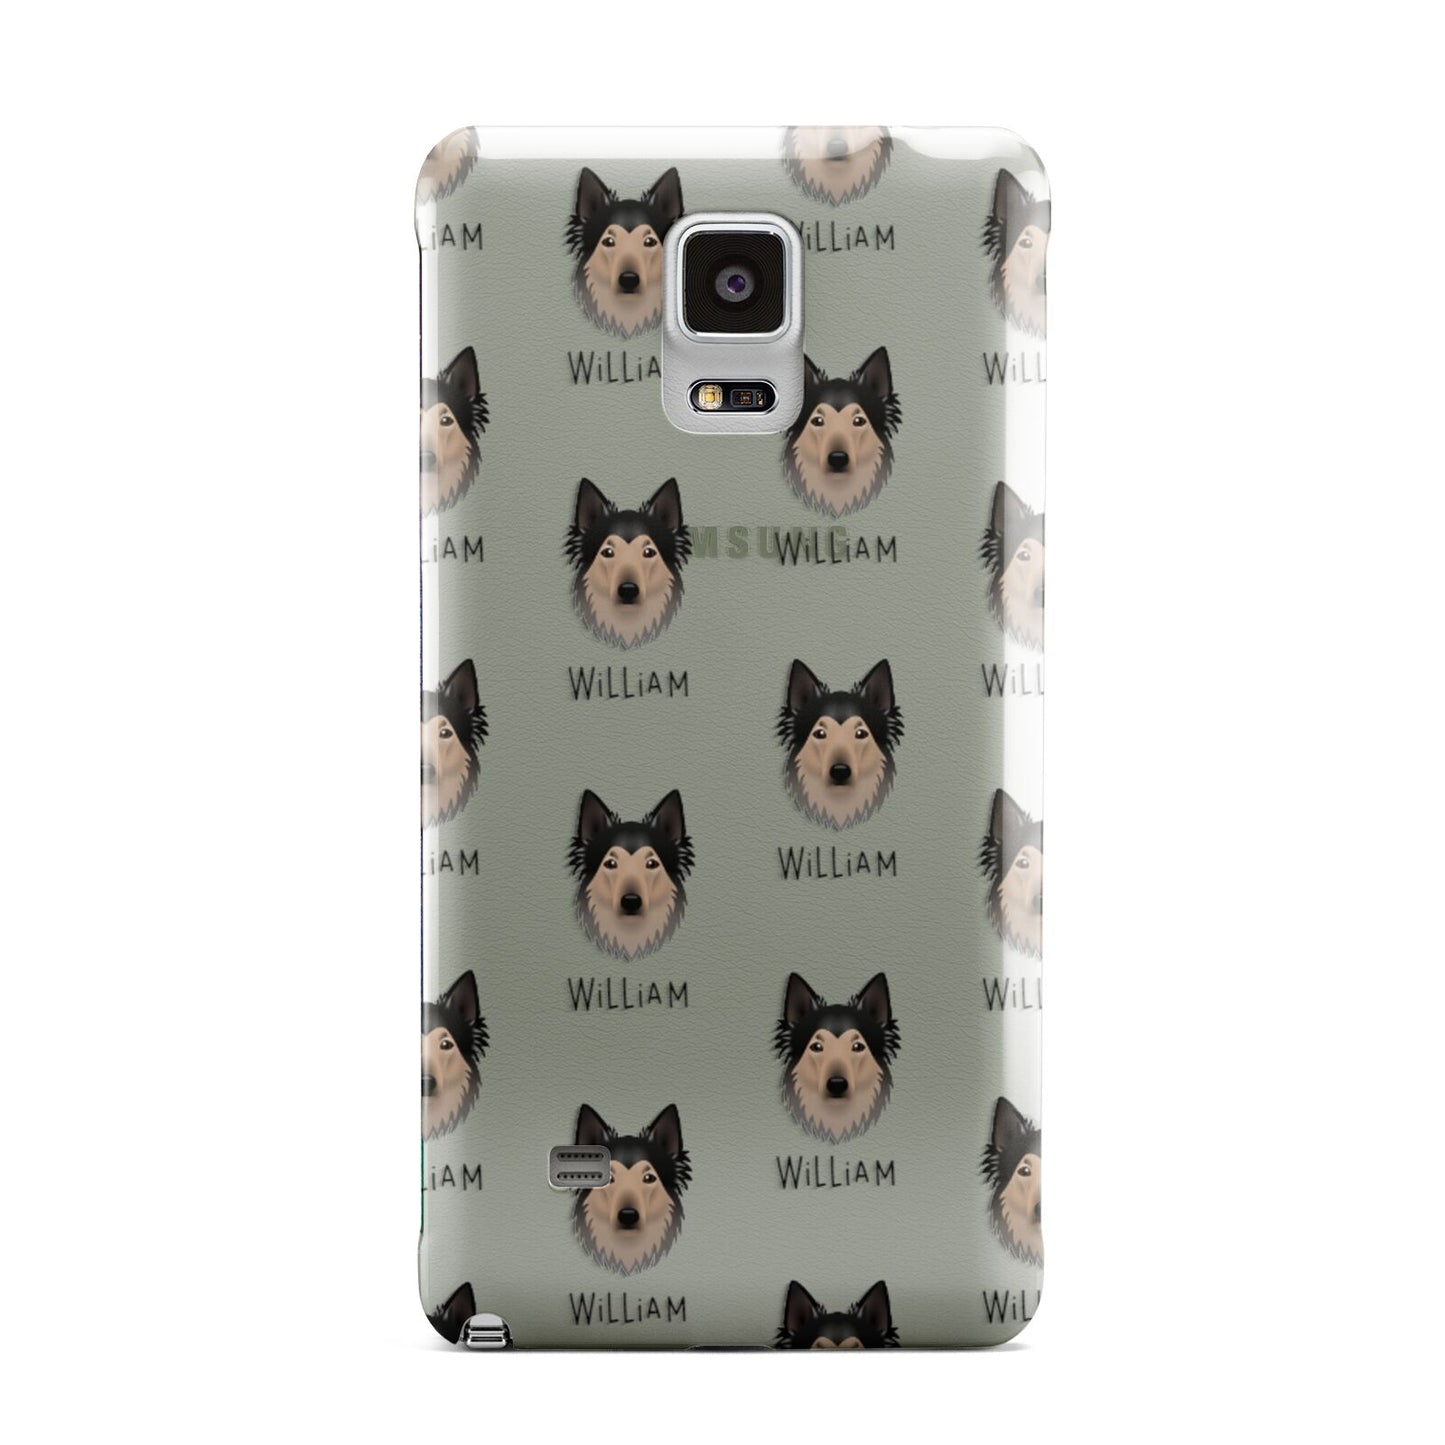 Shollie Icon with Name Samsung Galaxy Note 4 Case